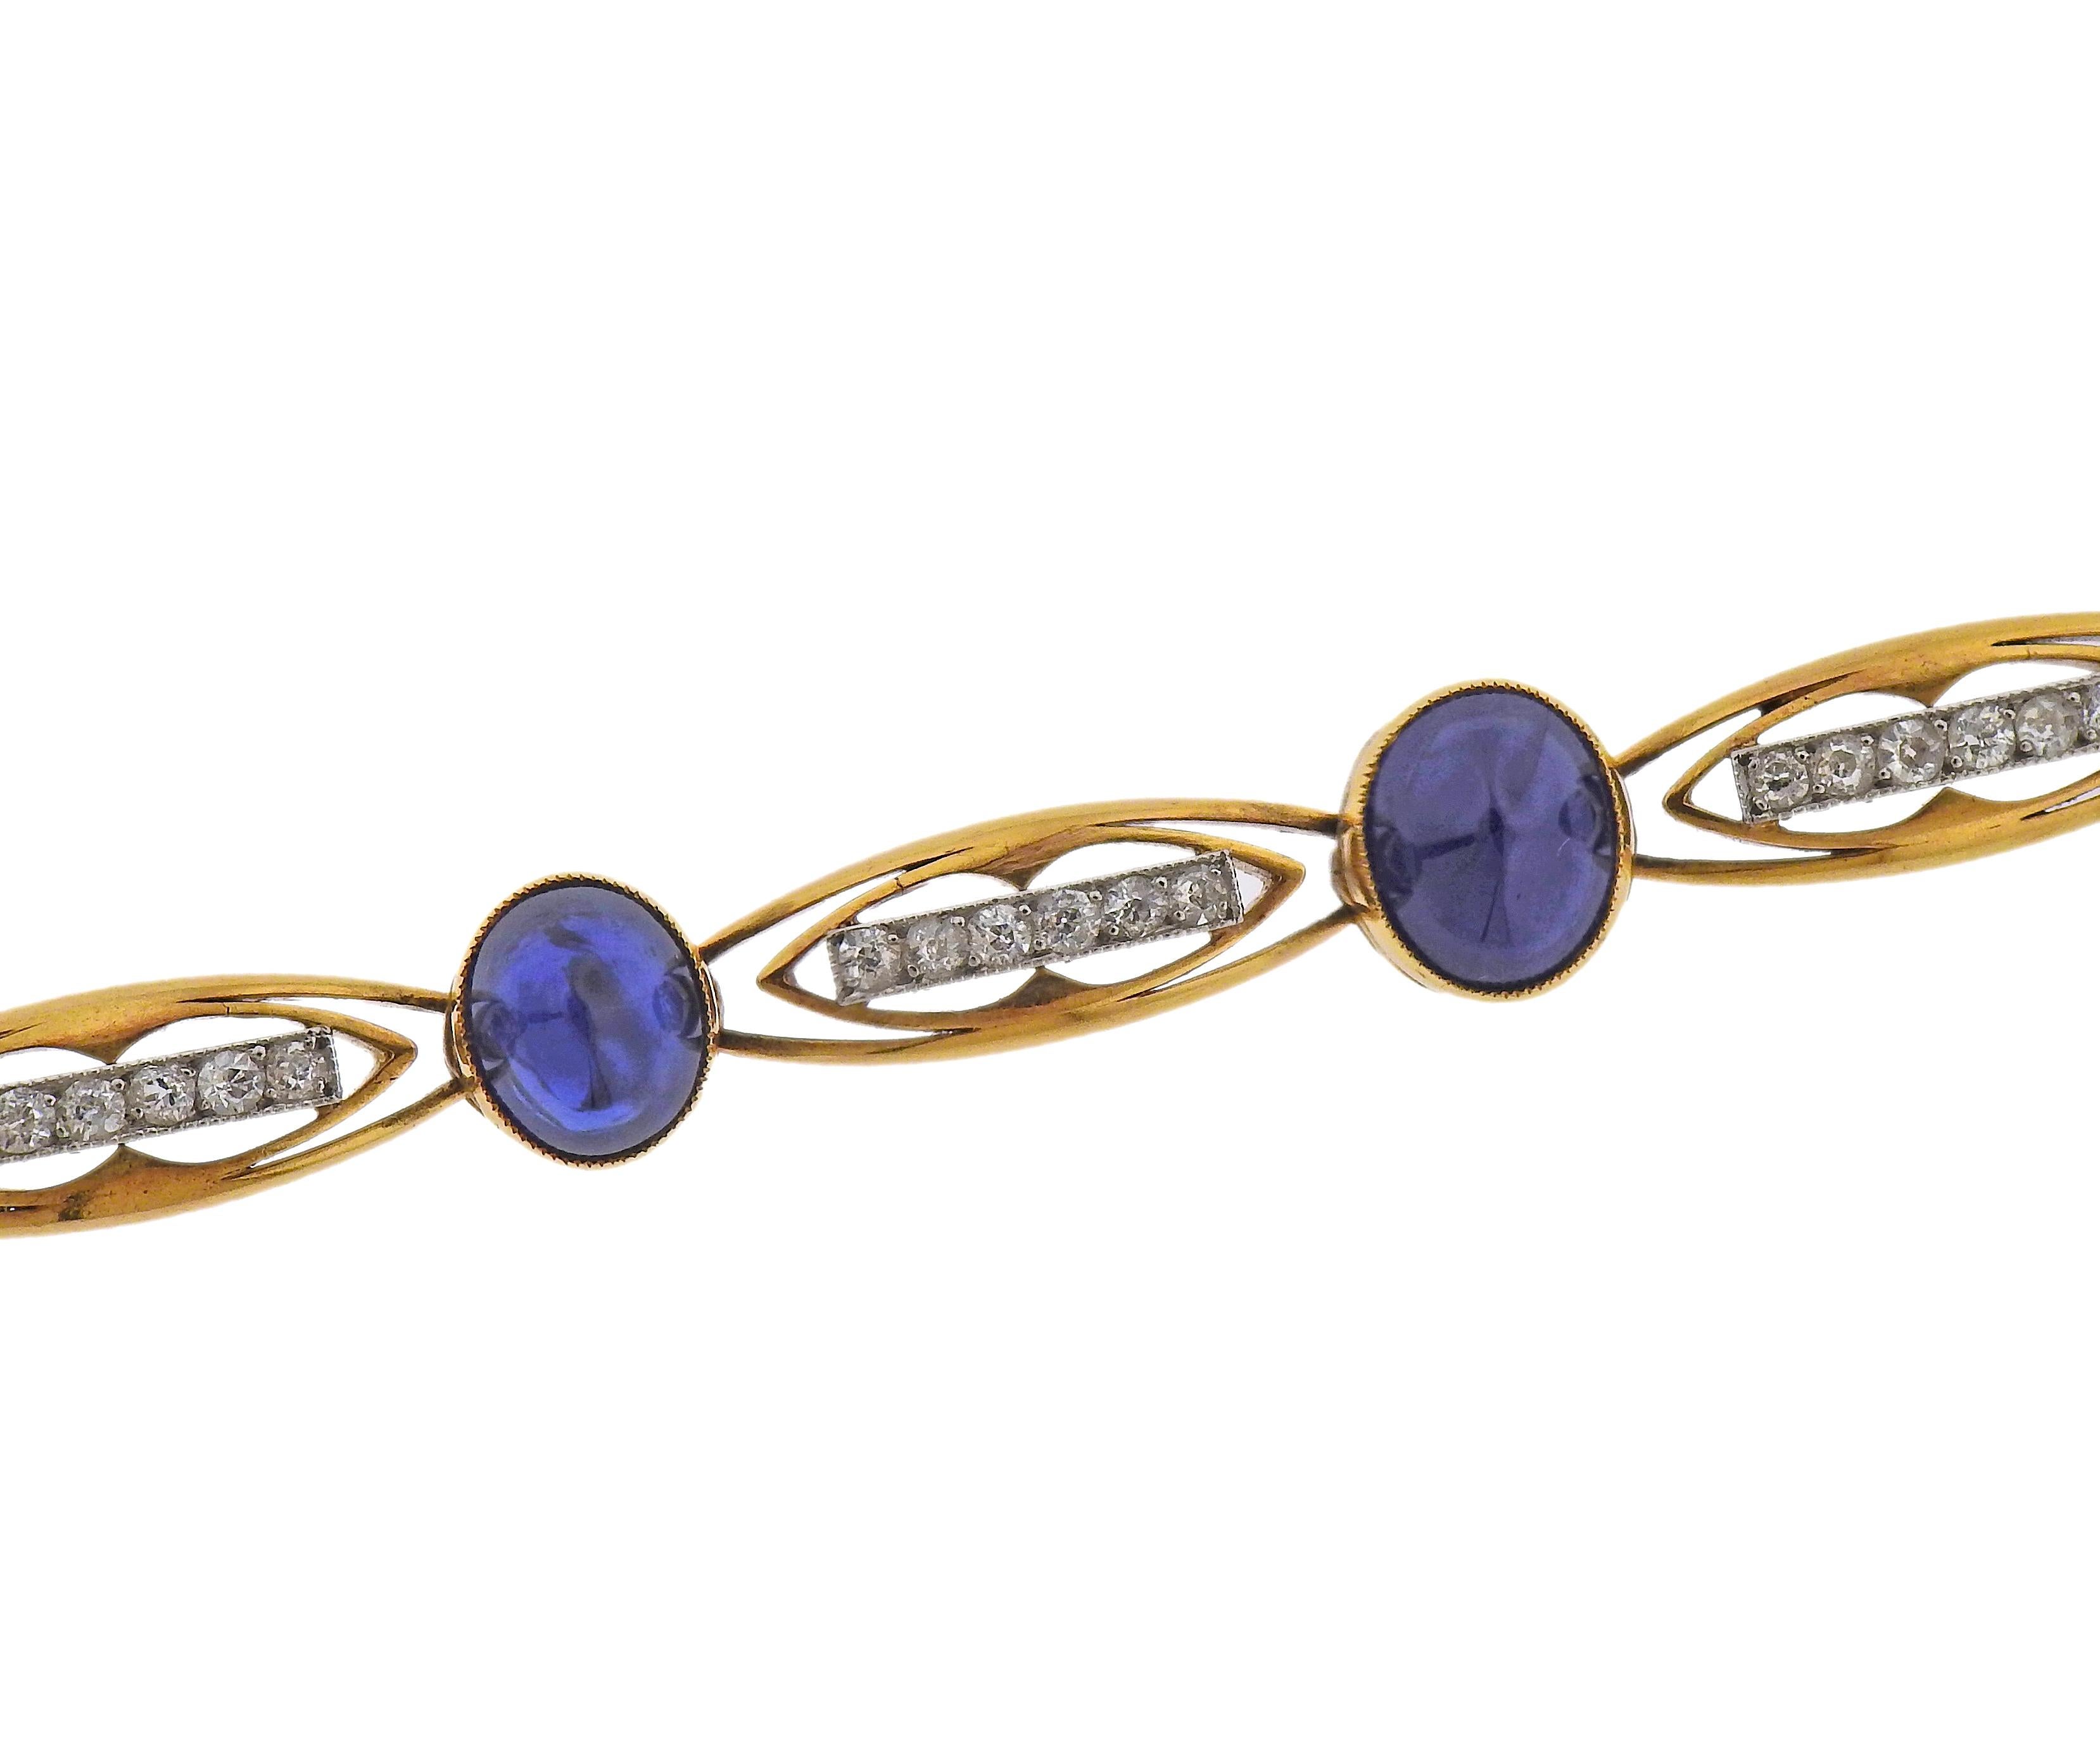 Antique French made 18k gold bracelet, with 7 blue sapphire cabochons (measuring from 5.5 x 5mm to 9 x 7mm - one smaller stone has a tiny nick), with approx. 0.80ctw in old mine cut diamonds. Bracelet is 7